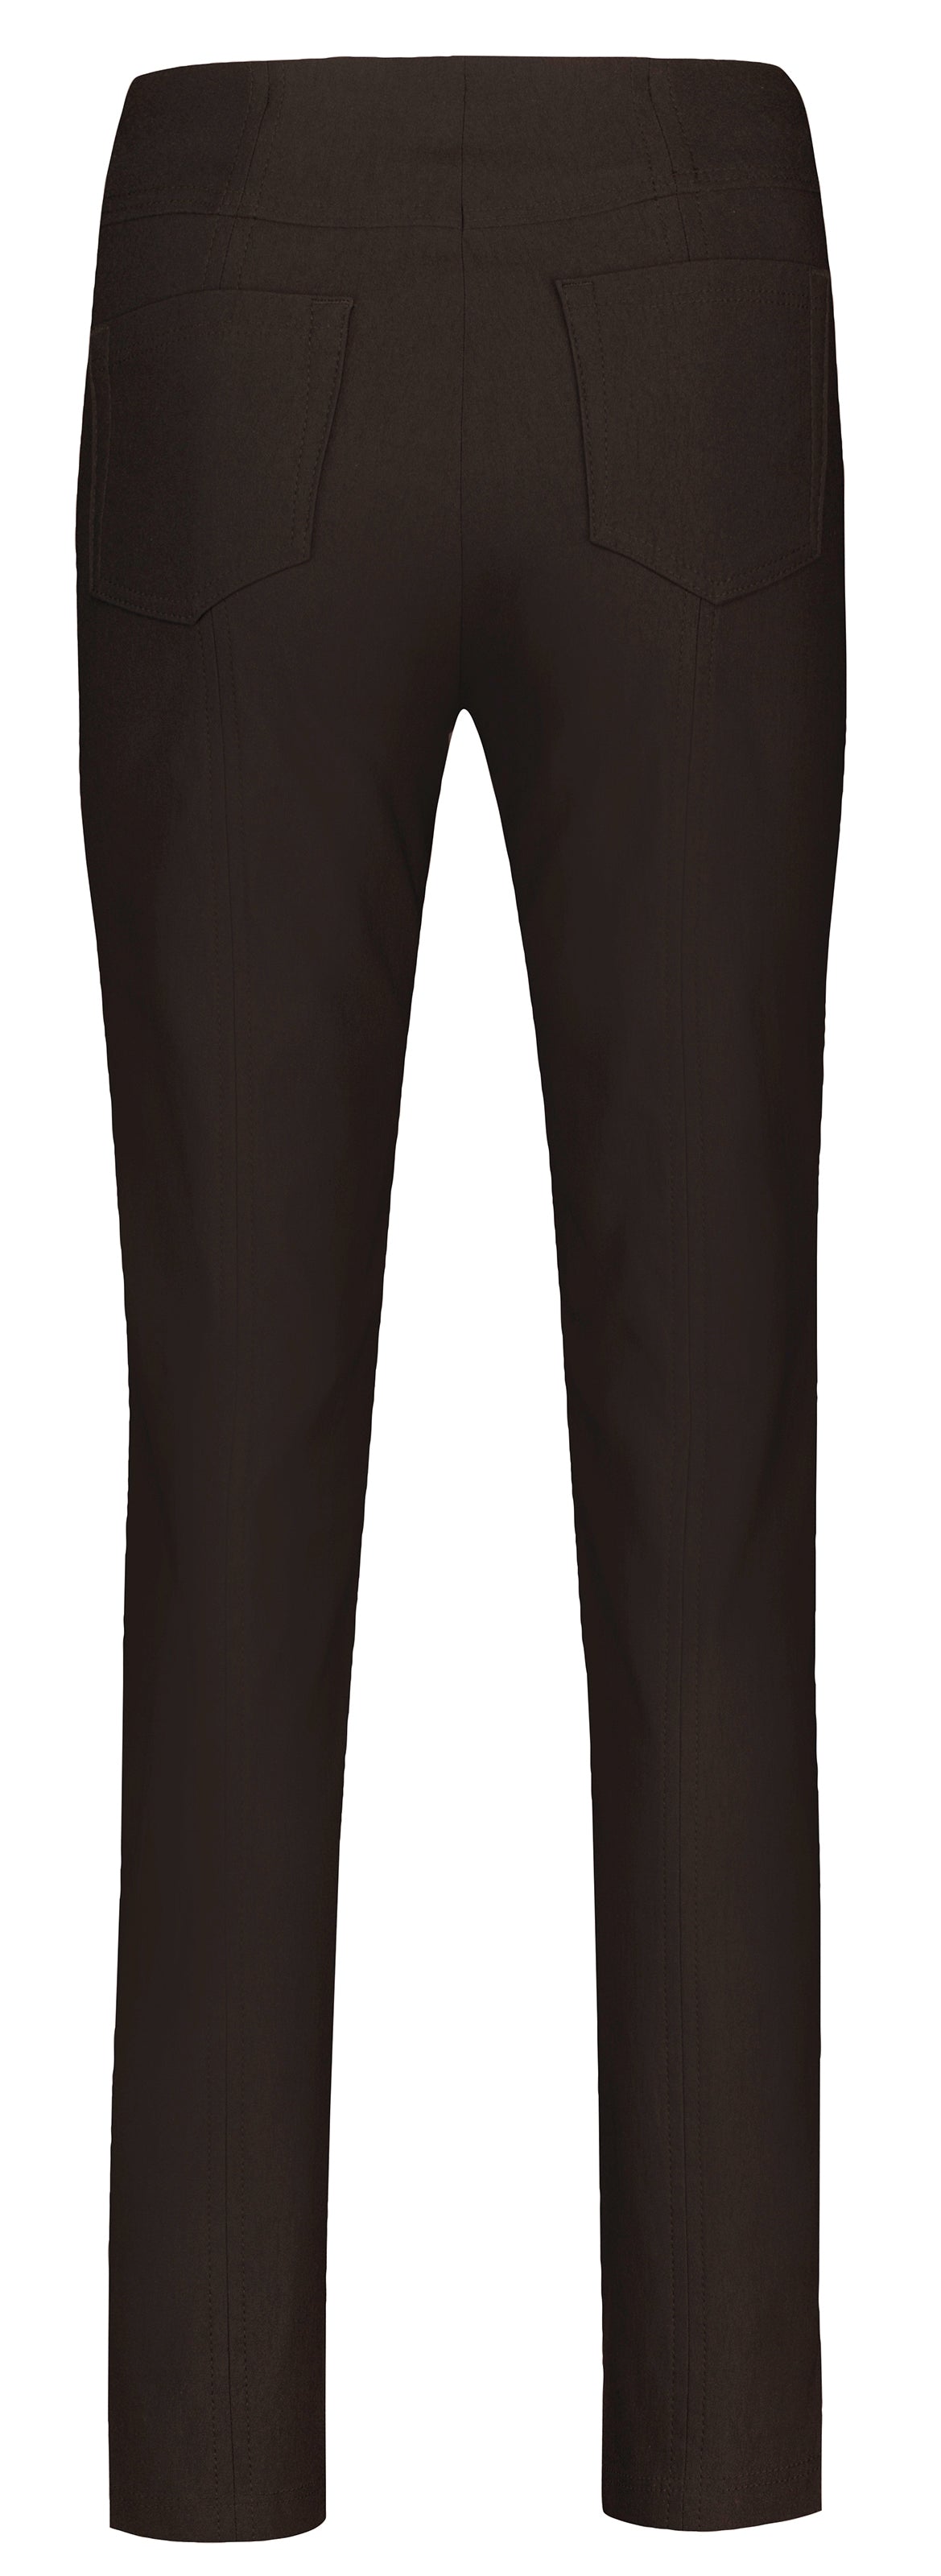 Robell Bella Chocolate Brown Trousers